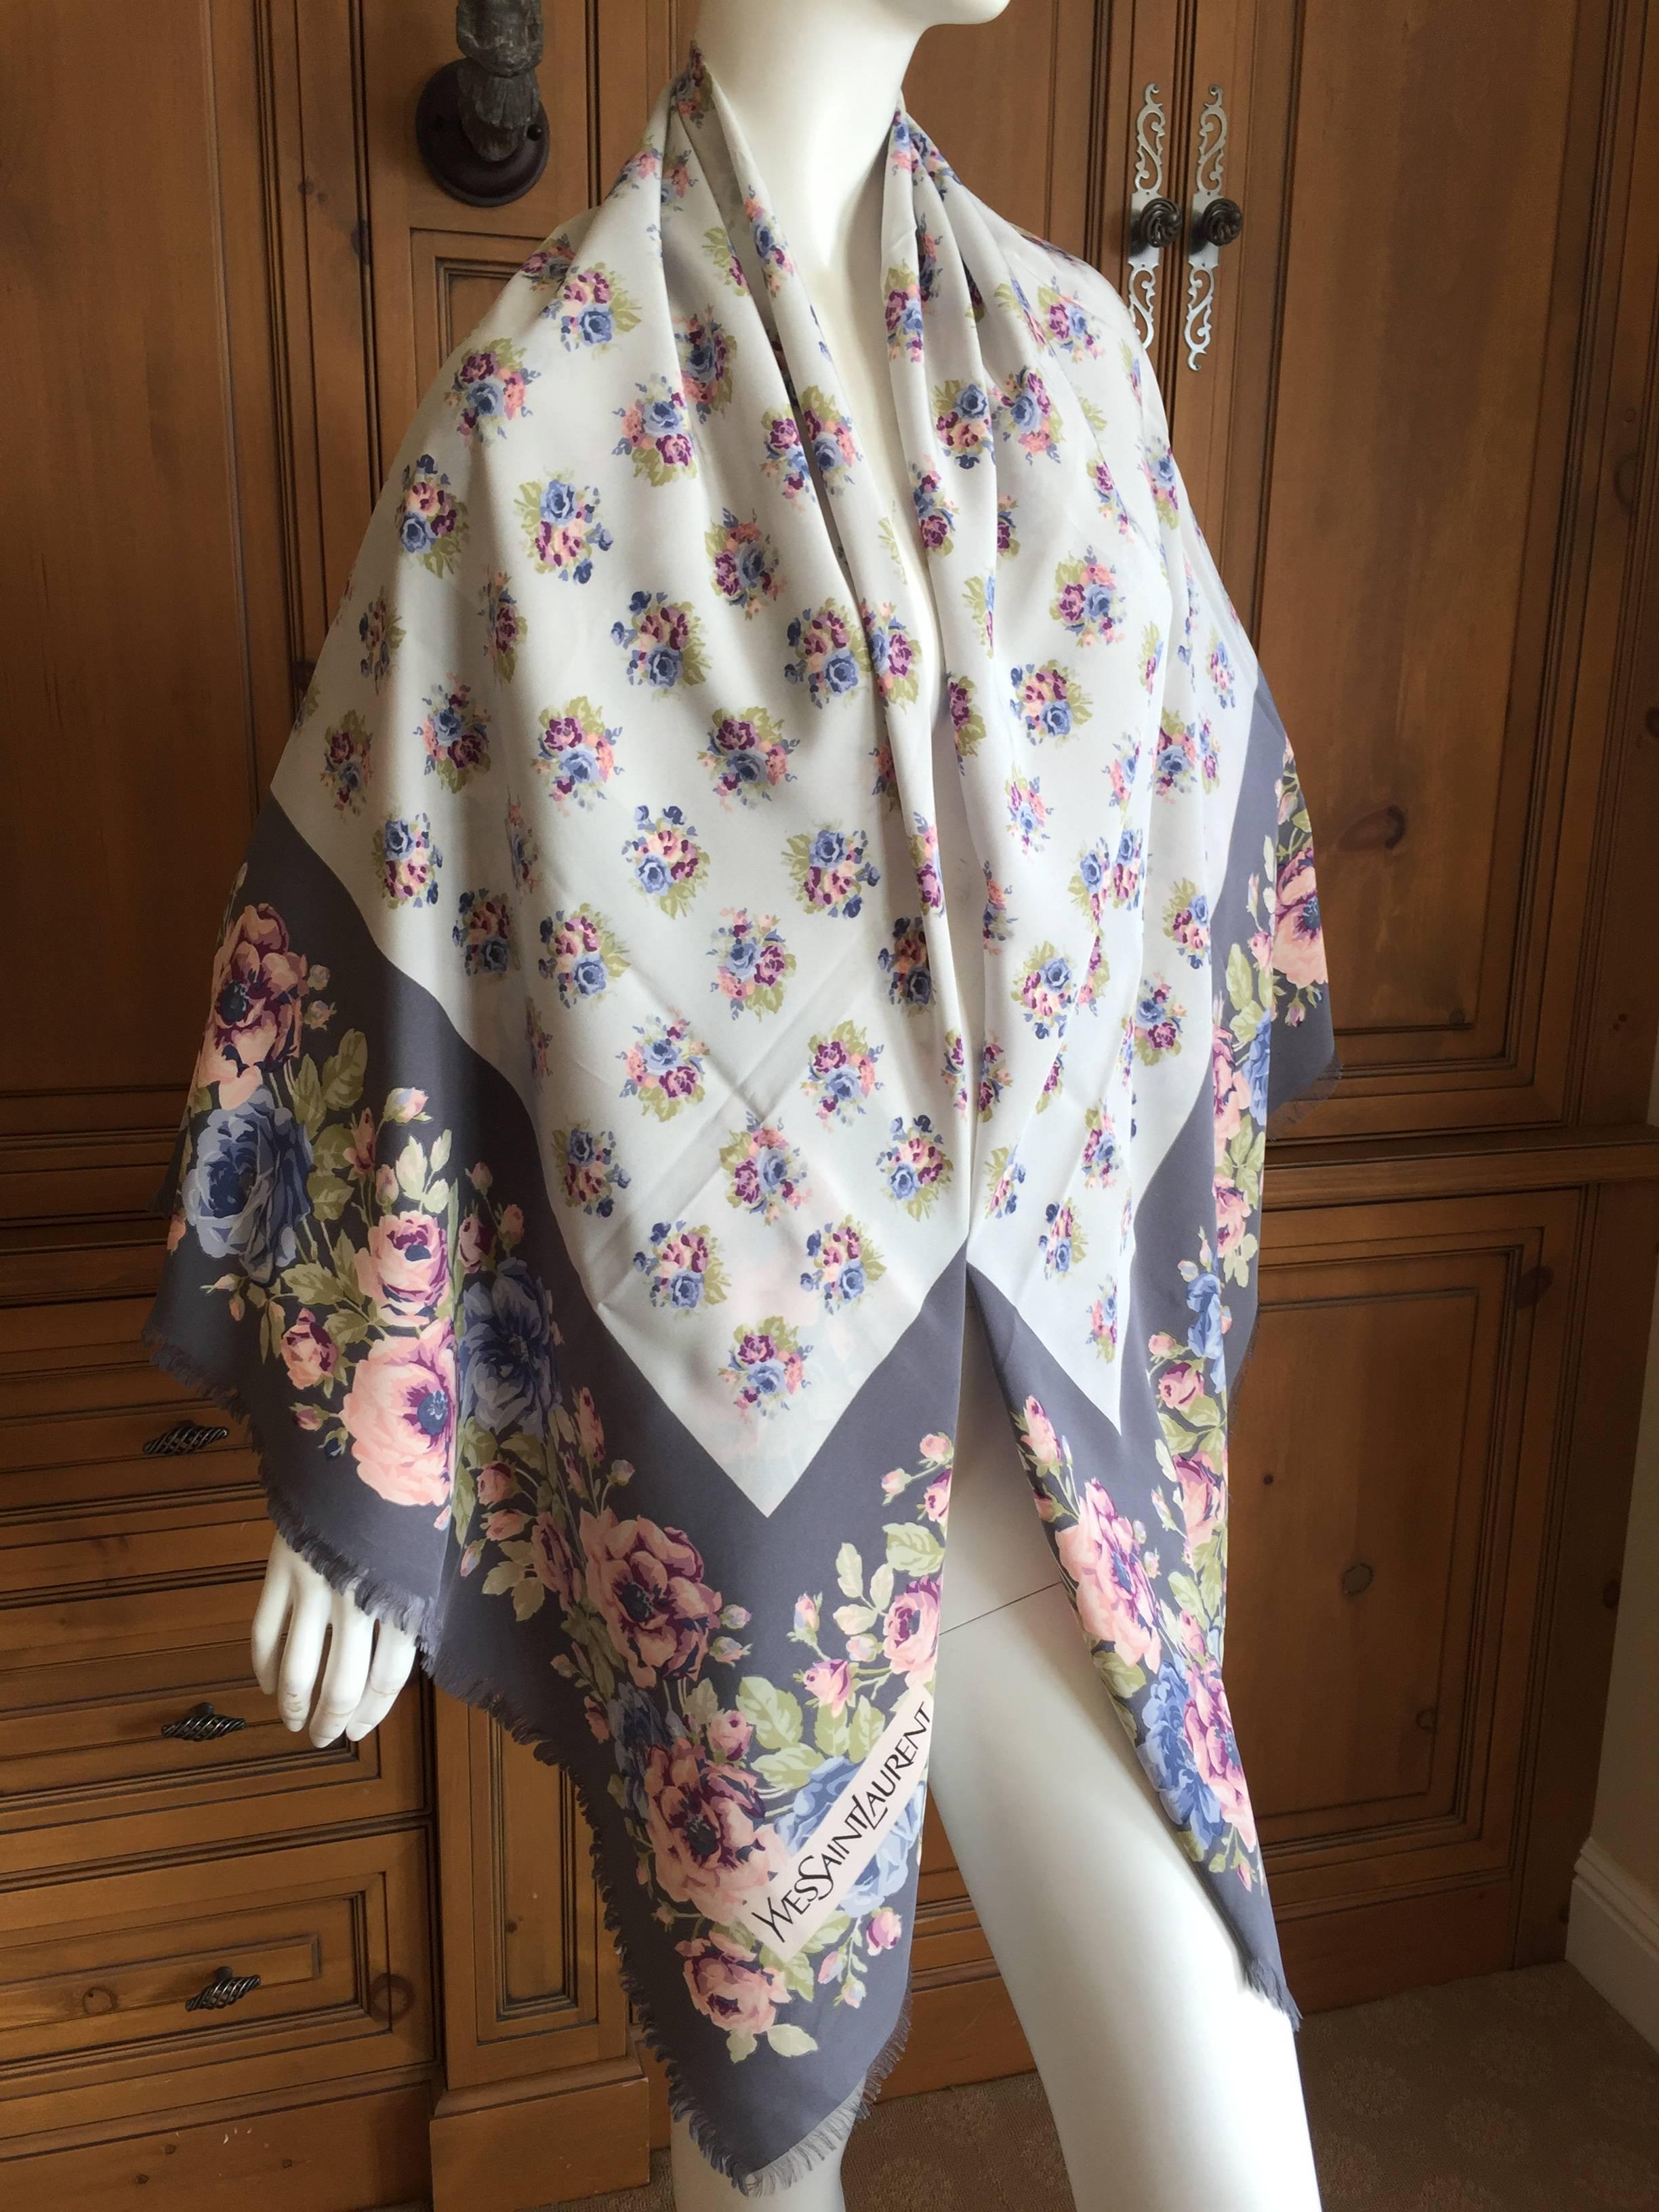 Beautiful large silk scarf from Yves Saint Laurent , prior to opening his pret a porter line Rive Gauche.
Light gray with muted florals, very pretty.
In excellent condition.
54